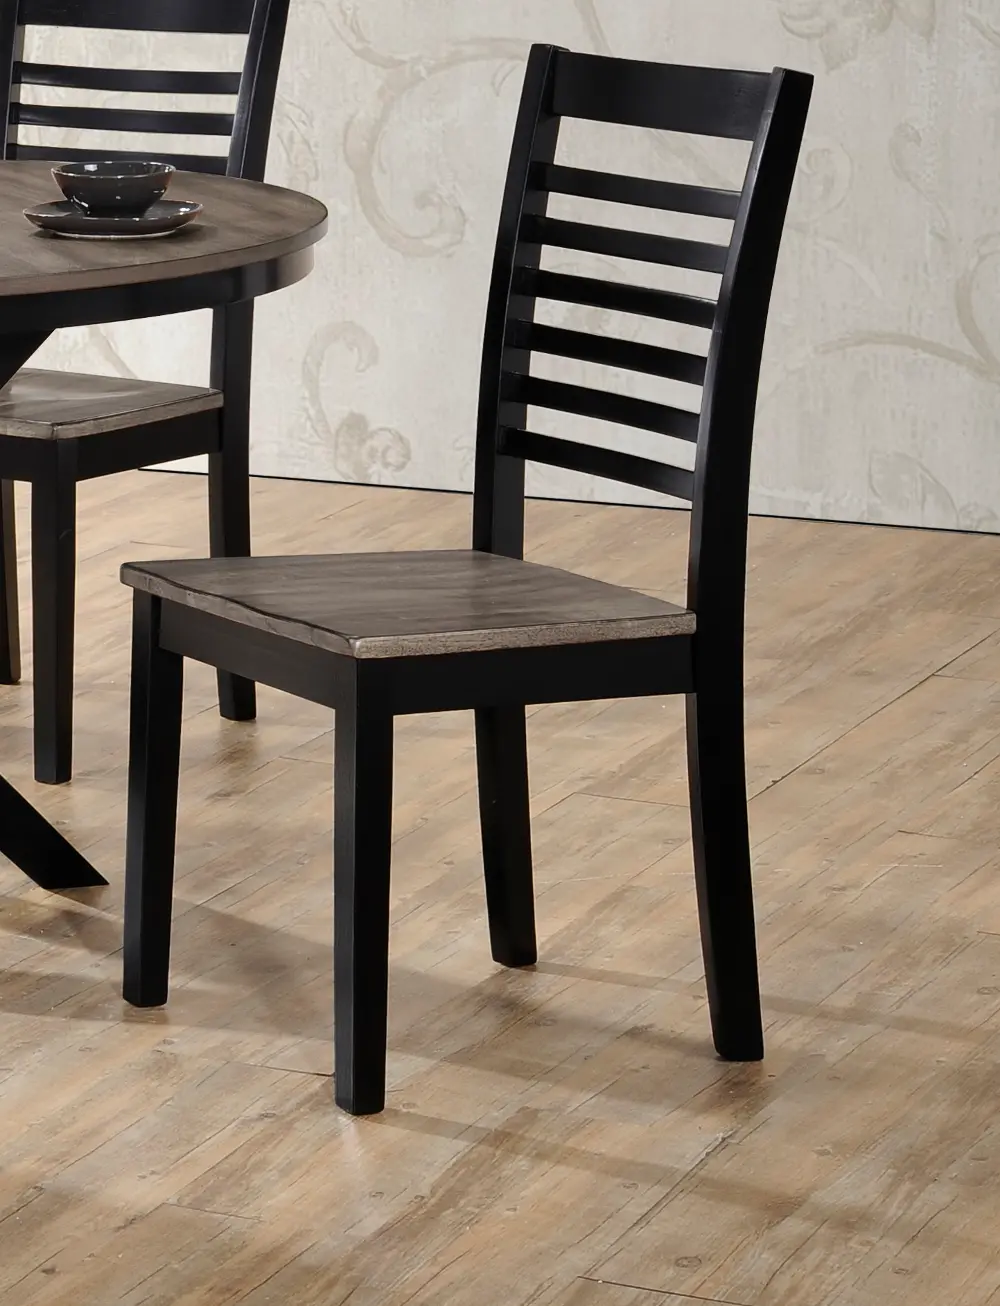 Ebony and Ash Contemporary Dining Chair - South Beach-1